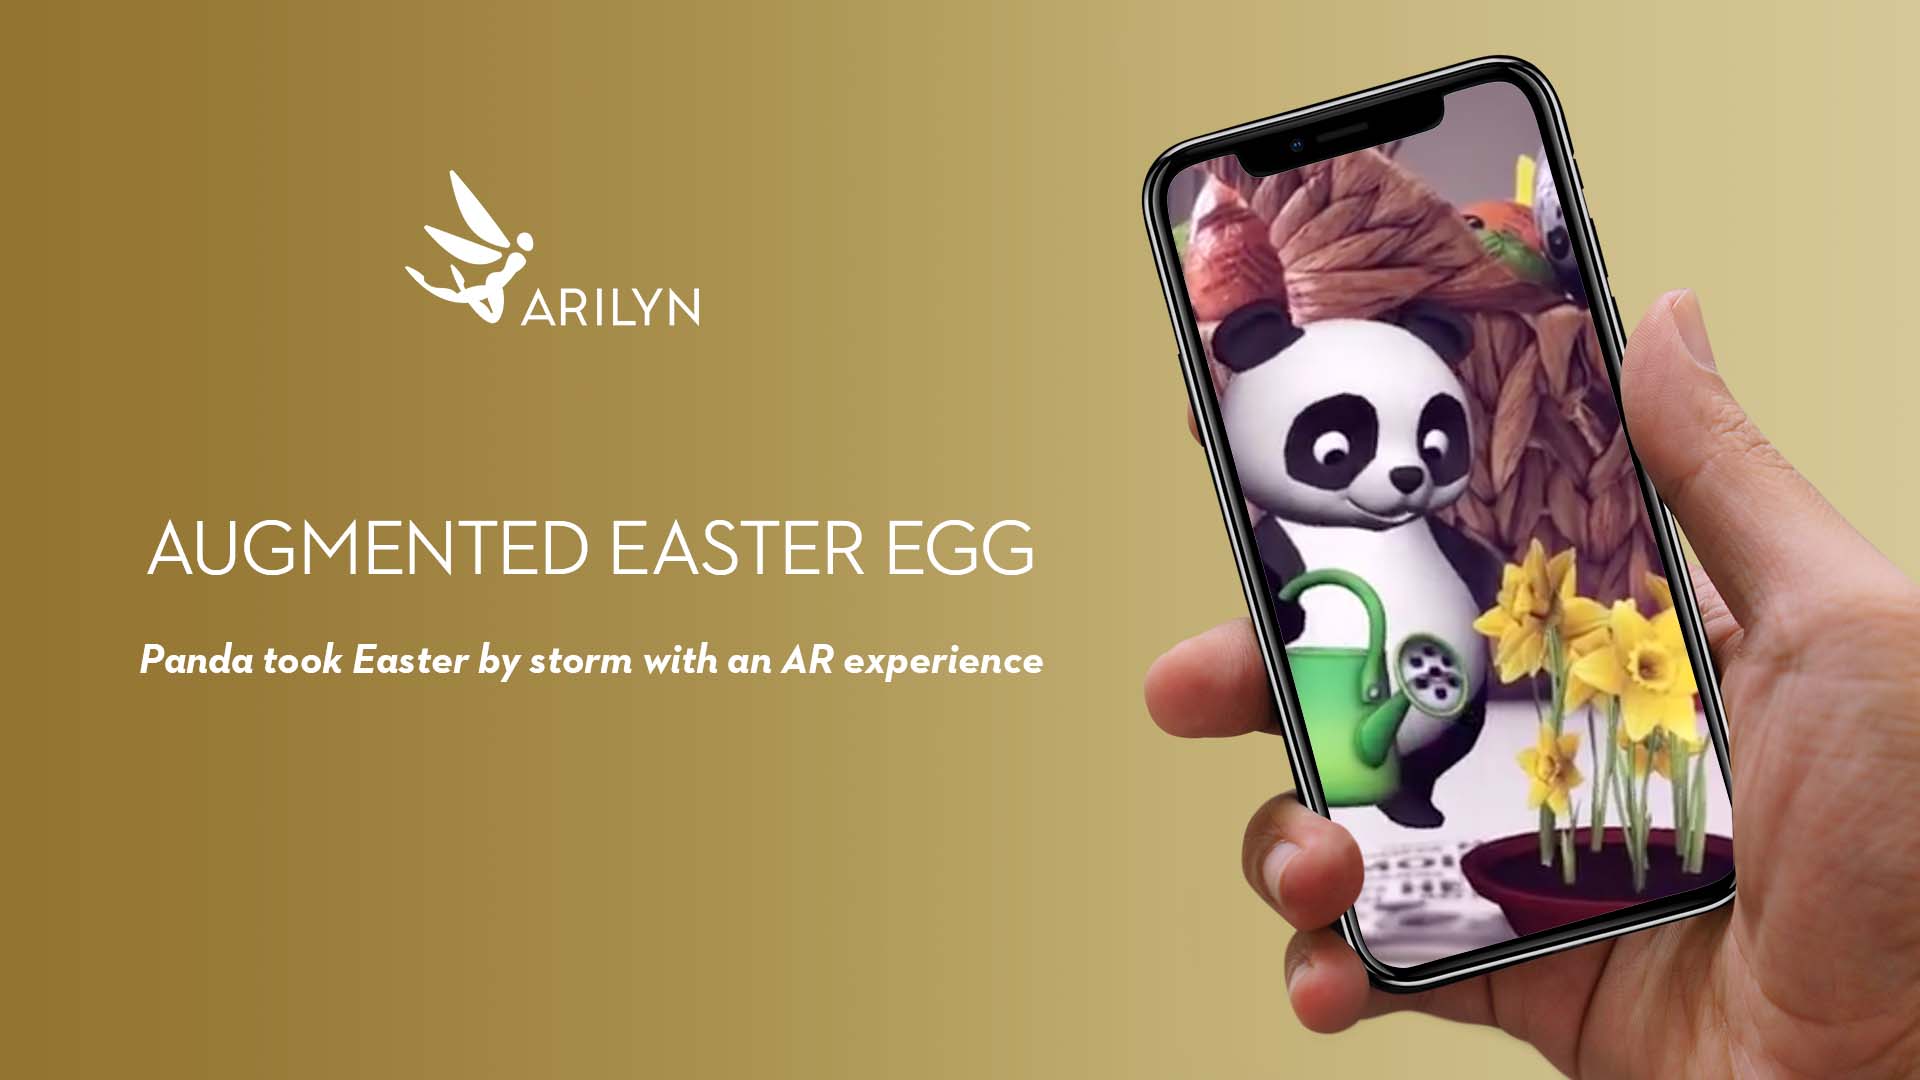 Augmented Easter egg breaks records